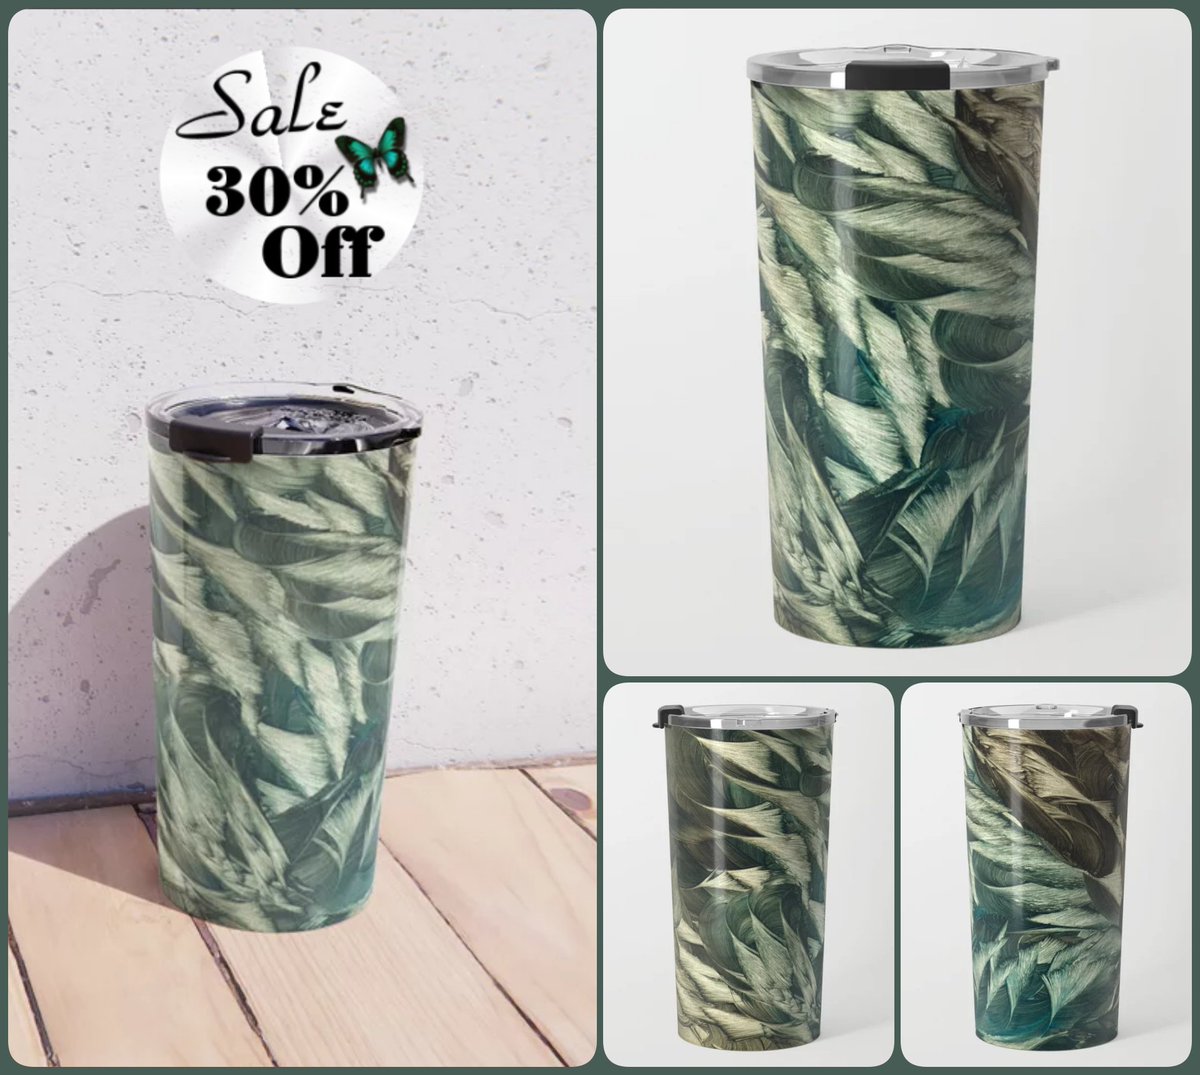 *SALE 30% Off*
Caca Travel Mug~by Art_Falaxy
~Art Exquisite!~
#coasters #gifts #trays #mugs #coffee #society6 #travel #artfalaxy #art #accents #modern #trendy #wine #water #placemats #tablecloths #runners #blue #green

society6.com/product/caca84…